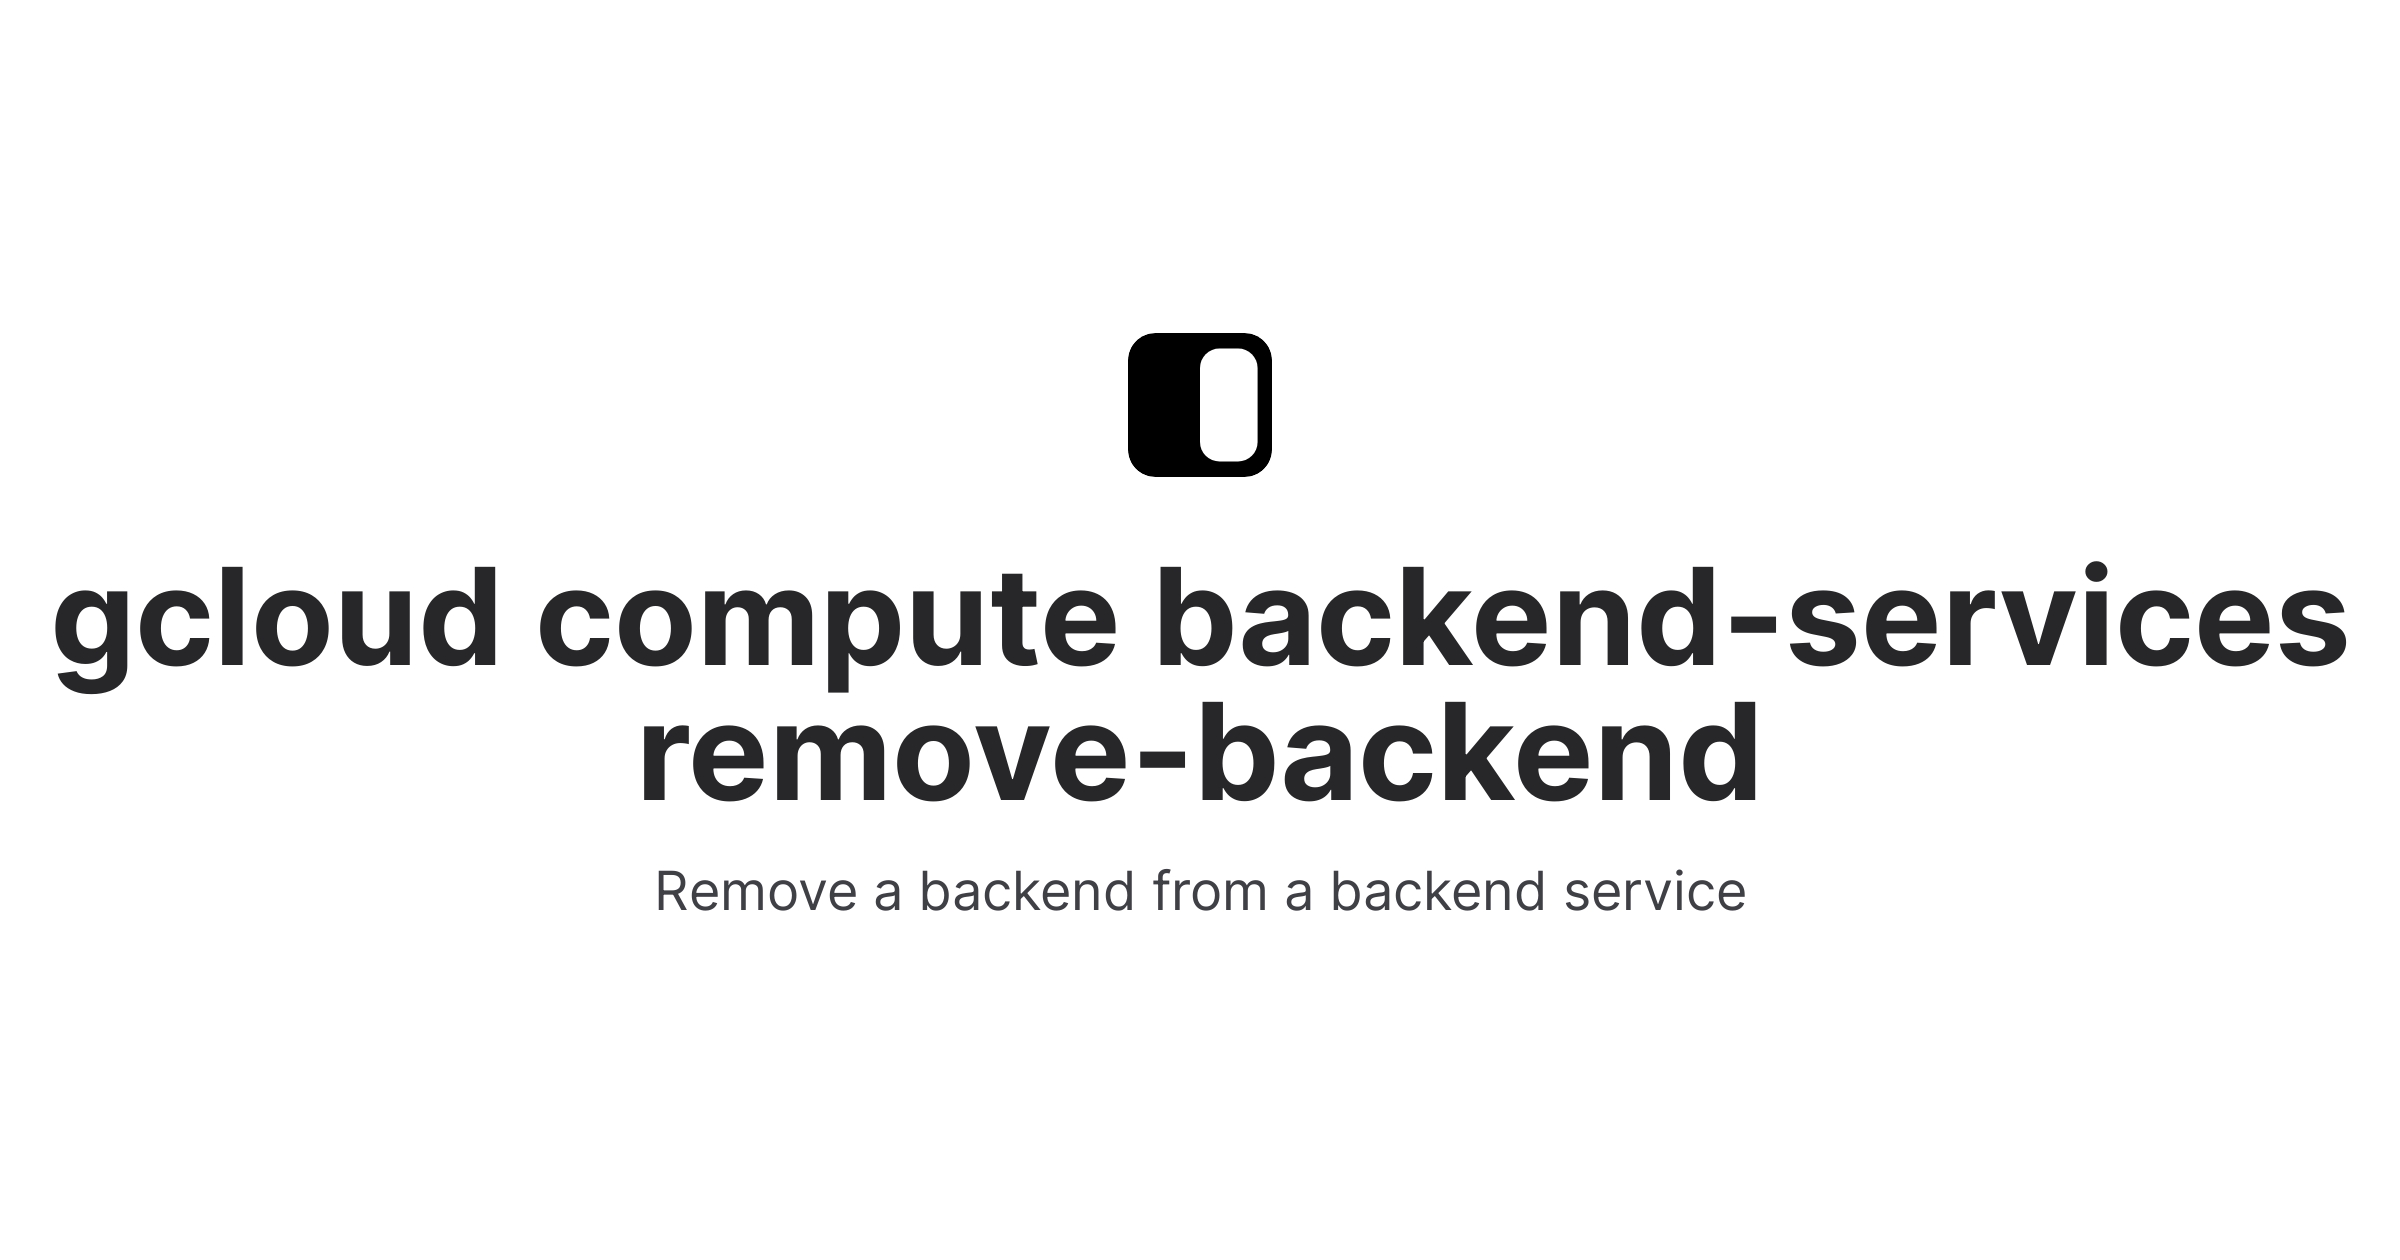 gcloud-compute-backend-services-remove-backend-fig